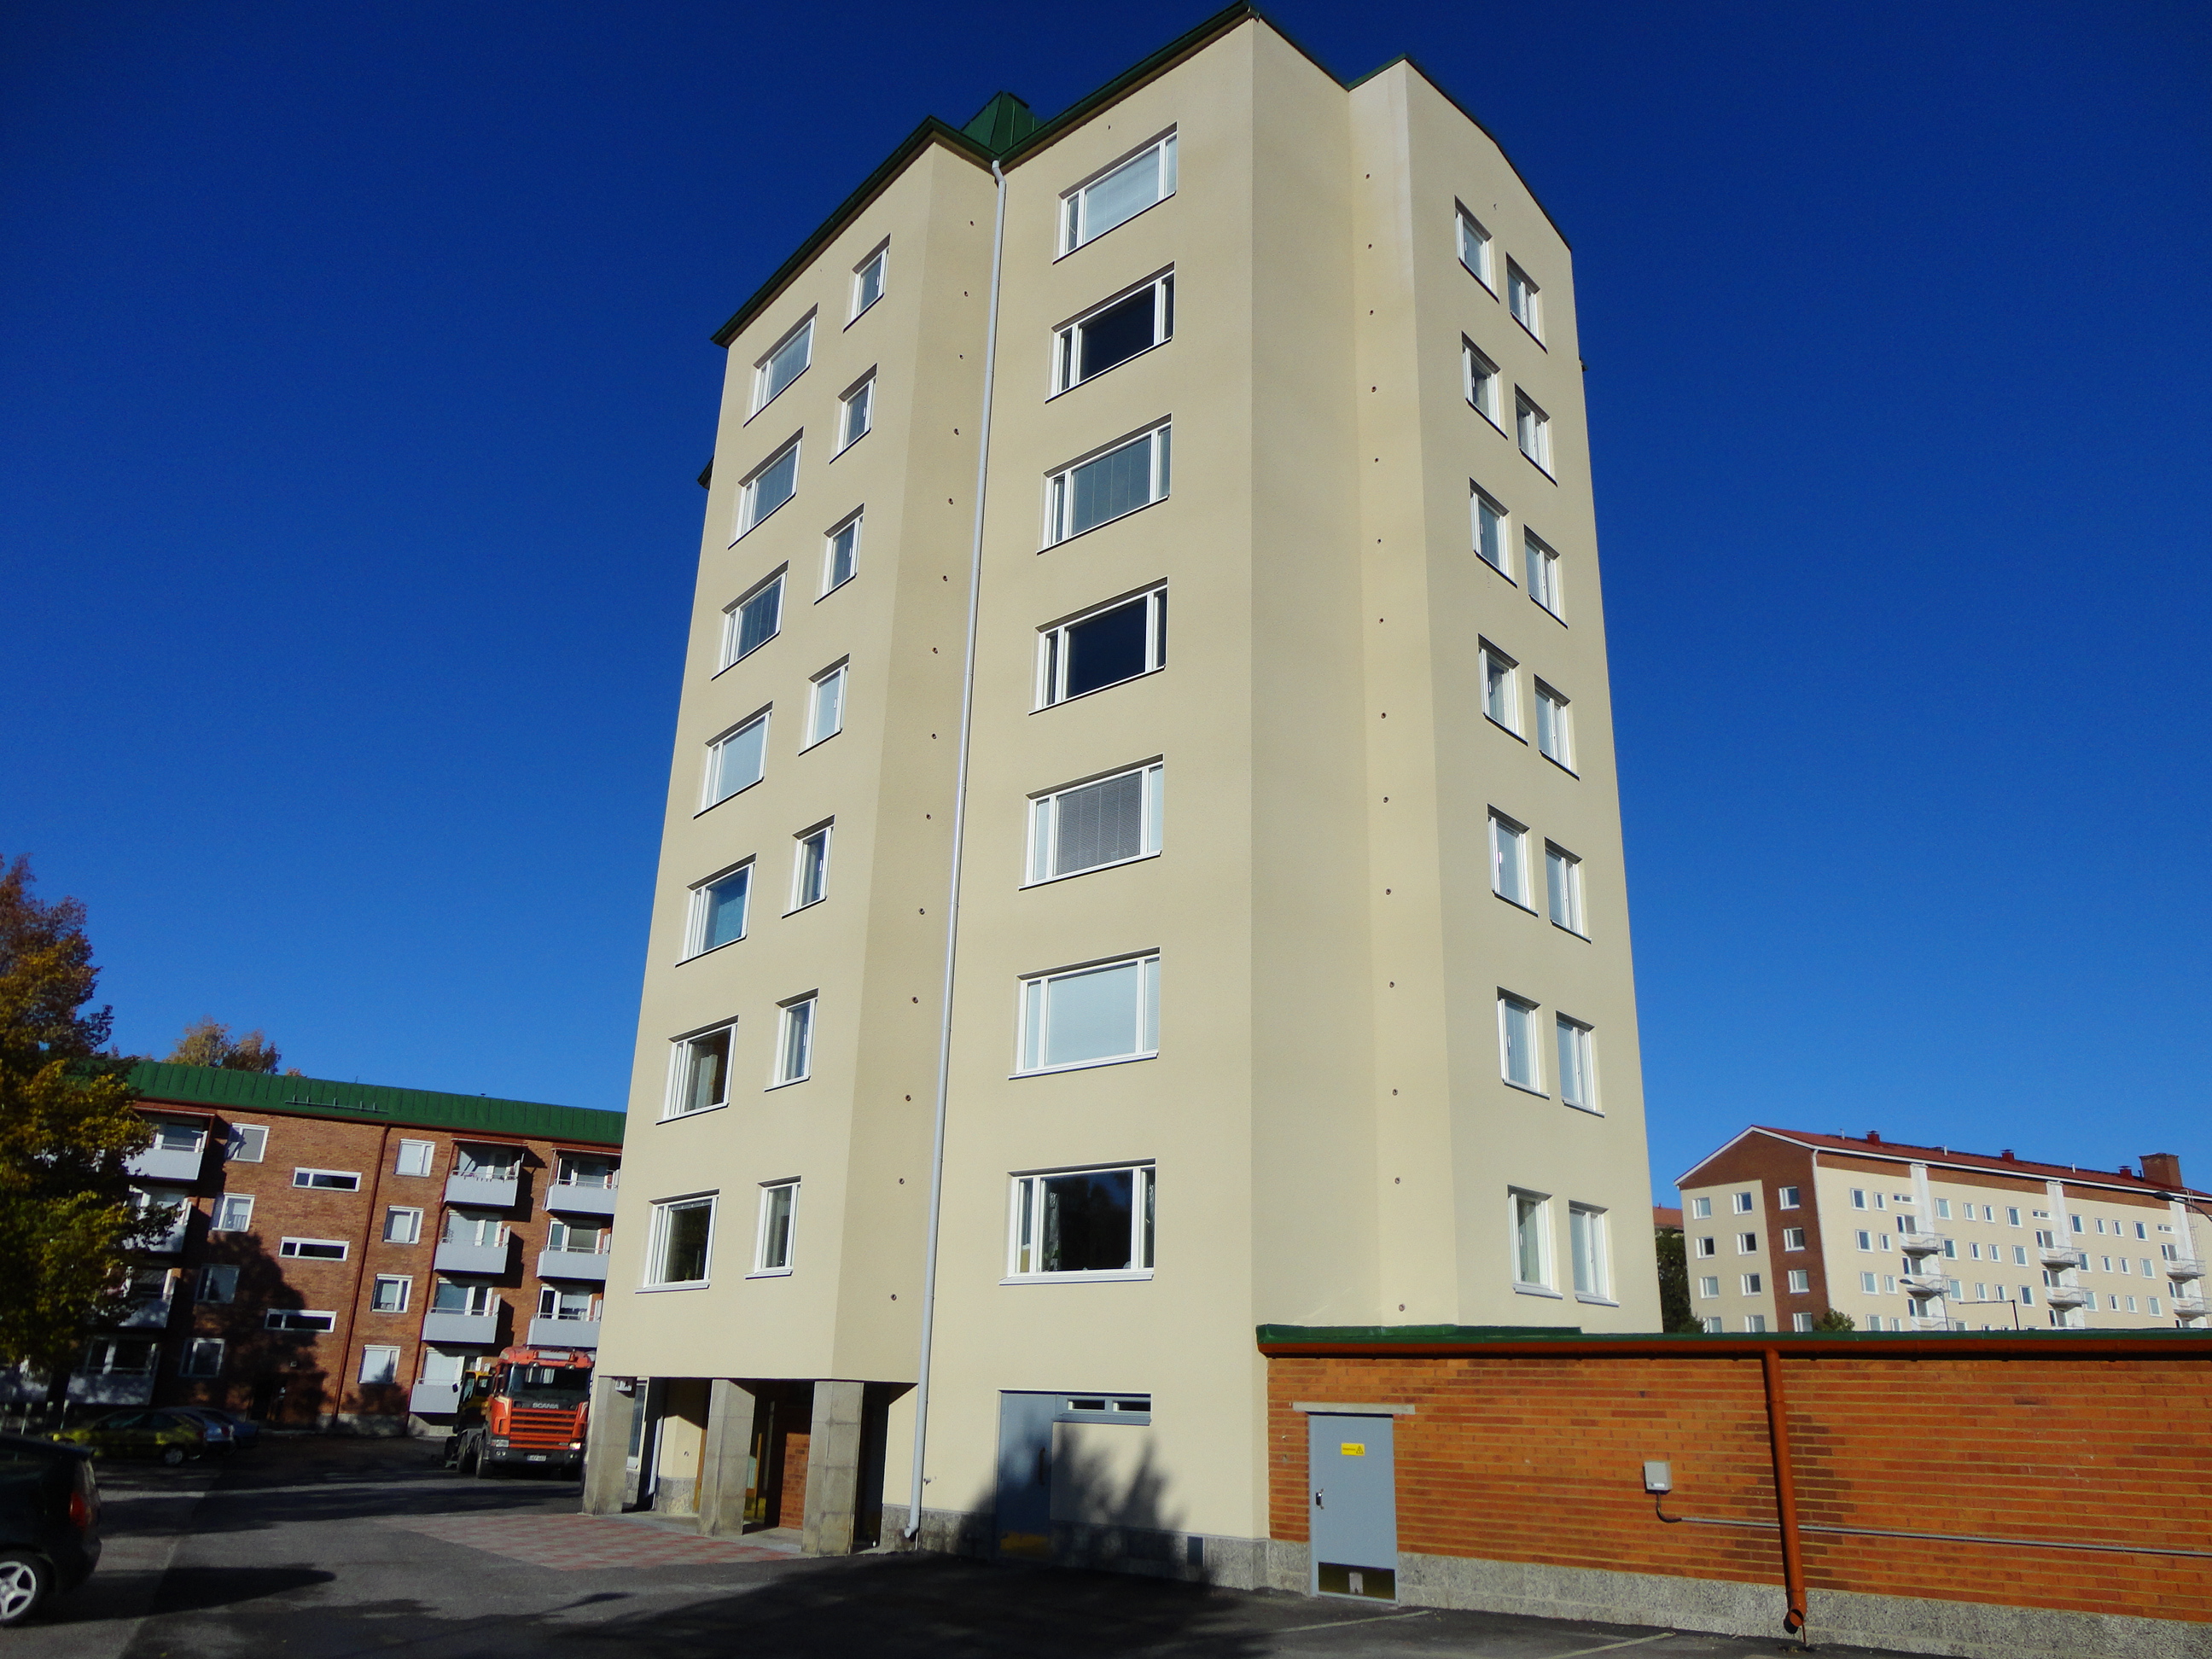 You are currently viewing As Oy Kalevankartano, Sammonkatu 28, Tampere